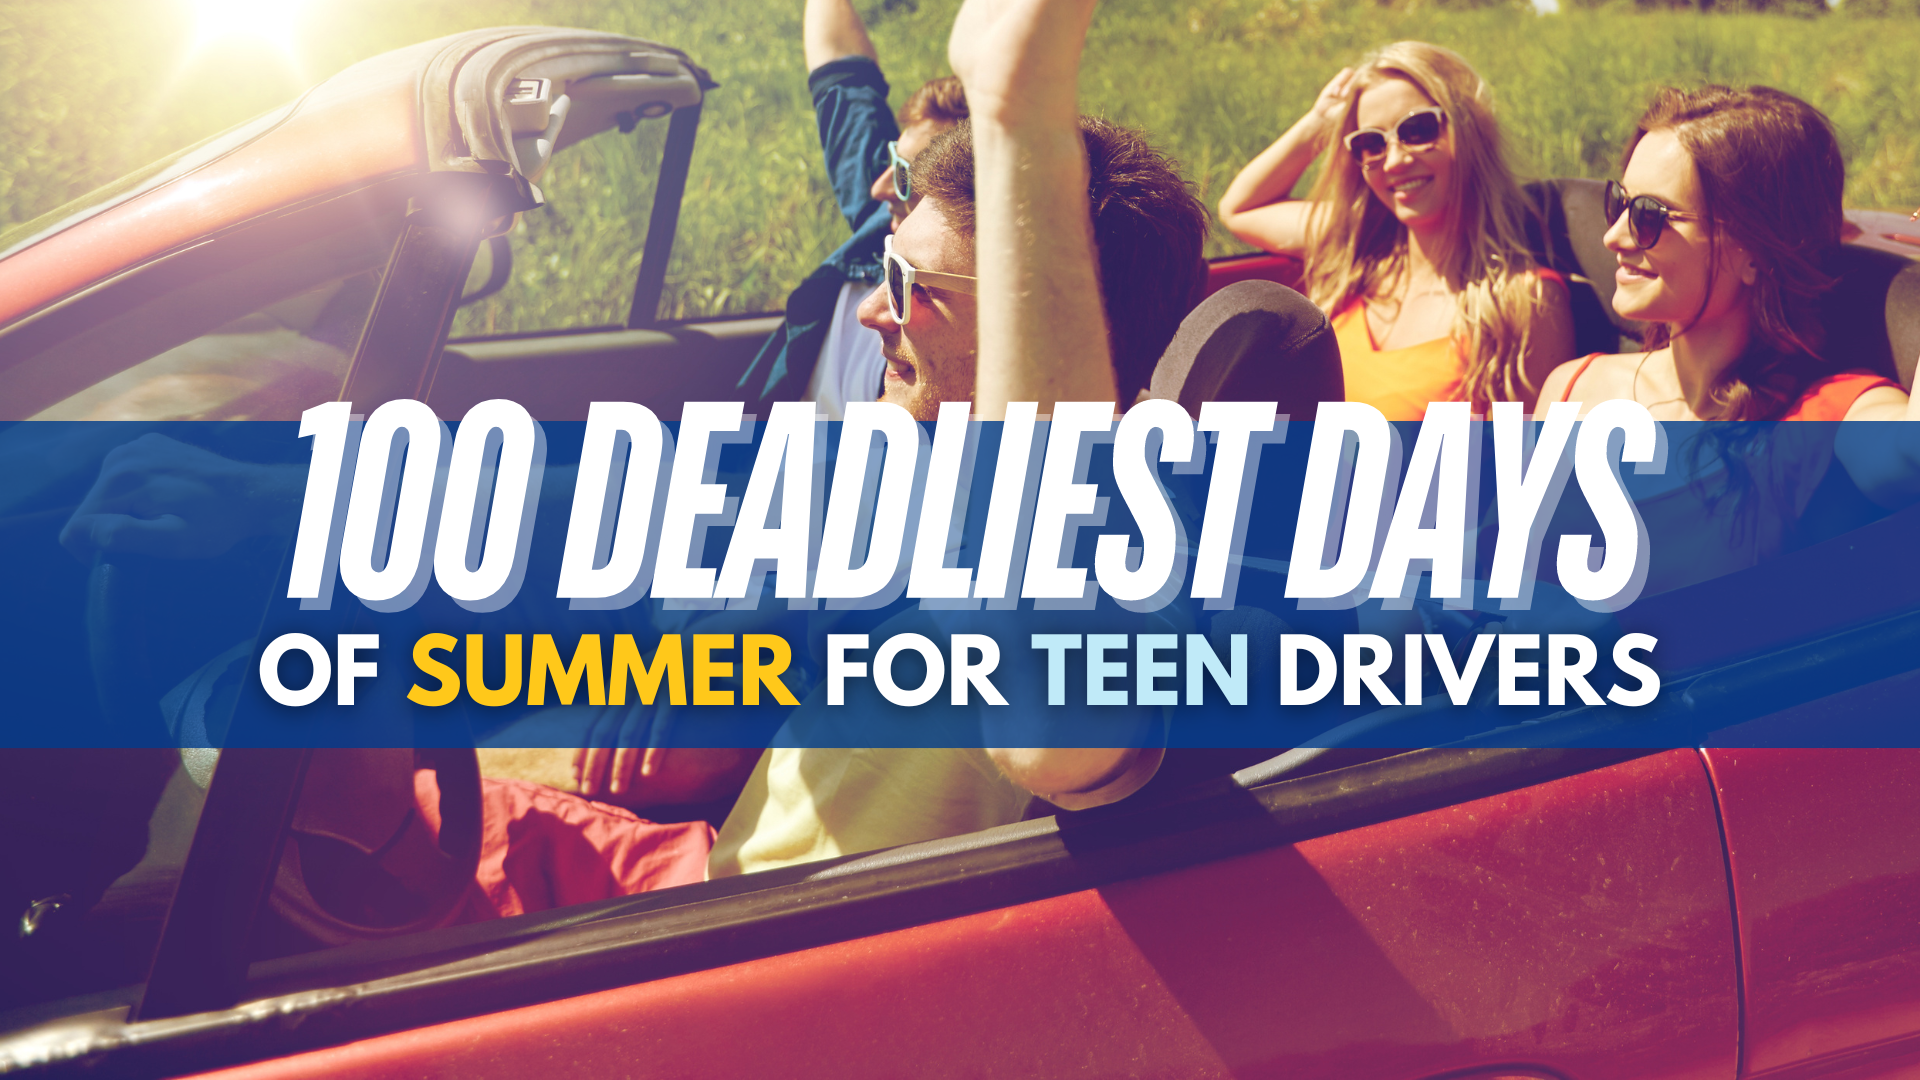 100 Deadliest Days of Summer for Teen Drivers In Michigan